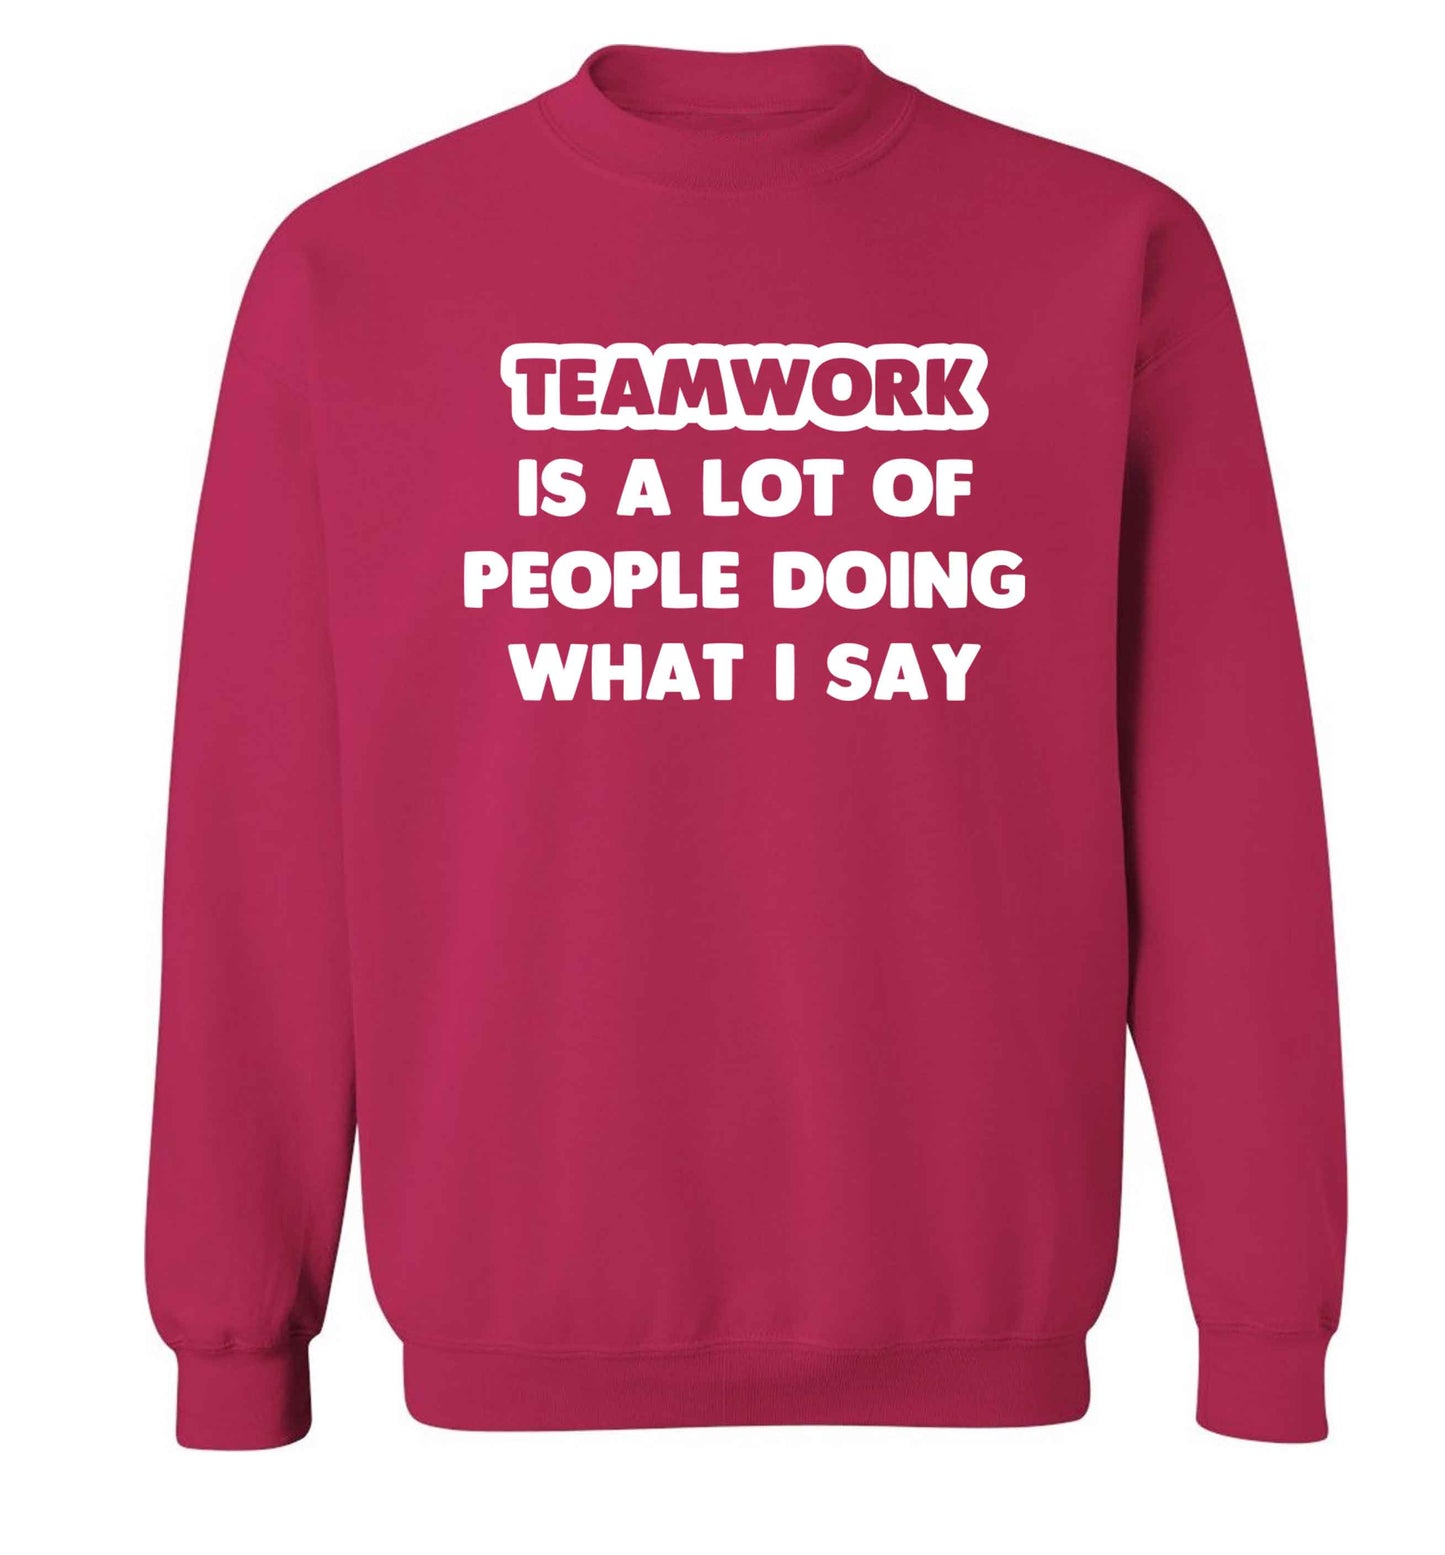 Teamwork is a lot of people doing what I say Adult's unisex pink Sweater 2XL